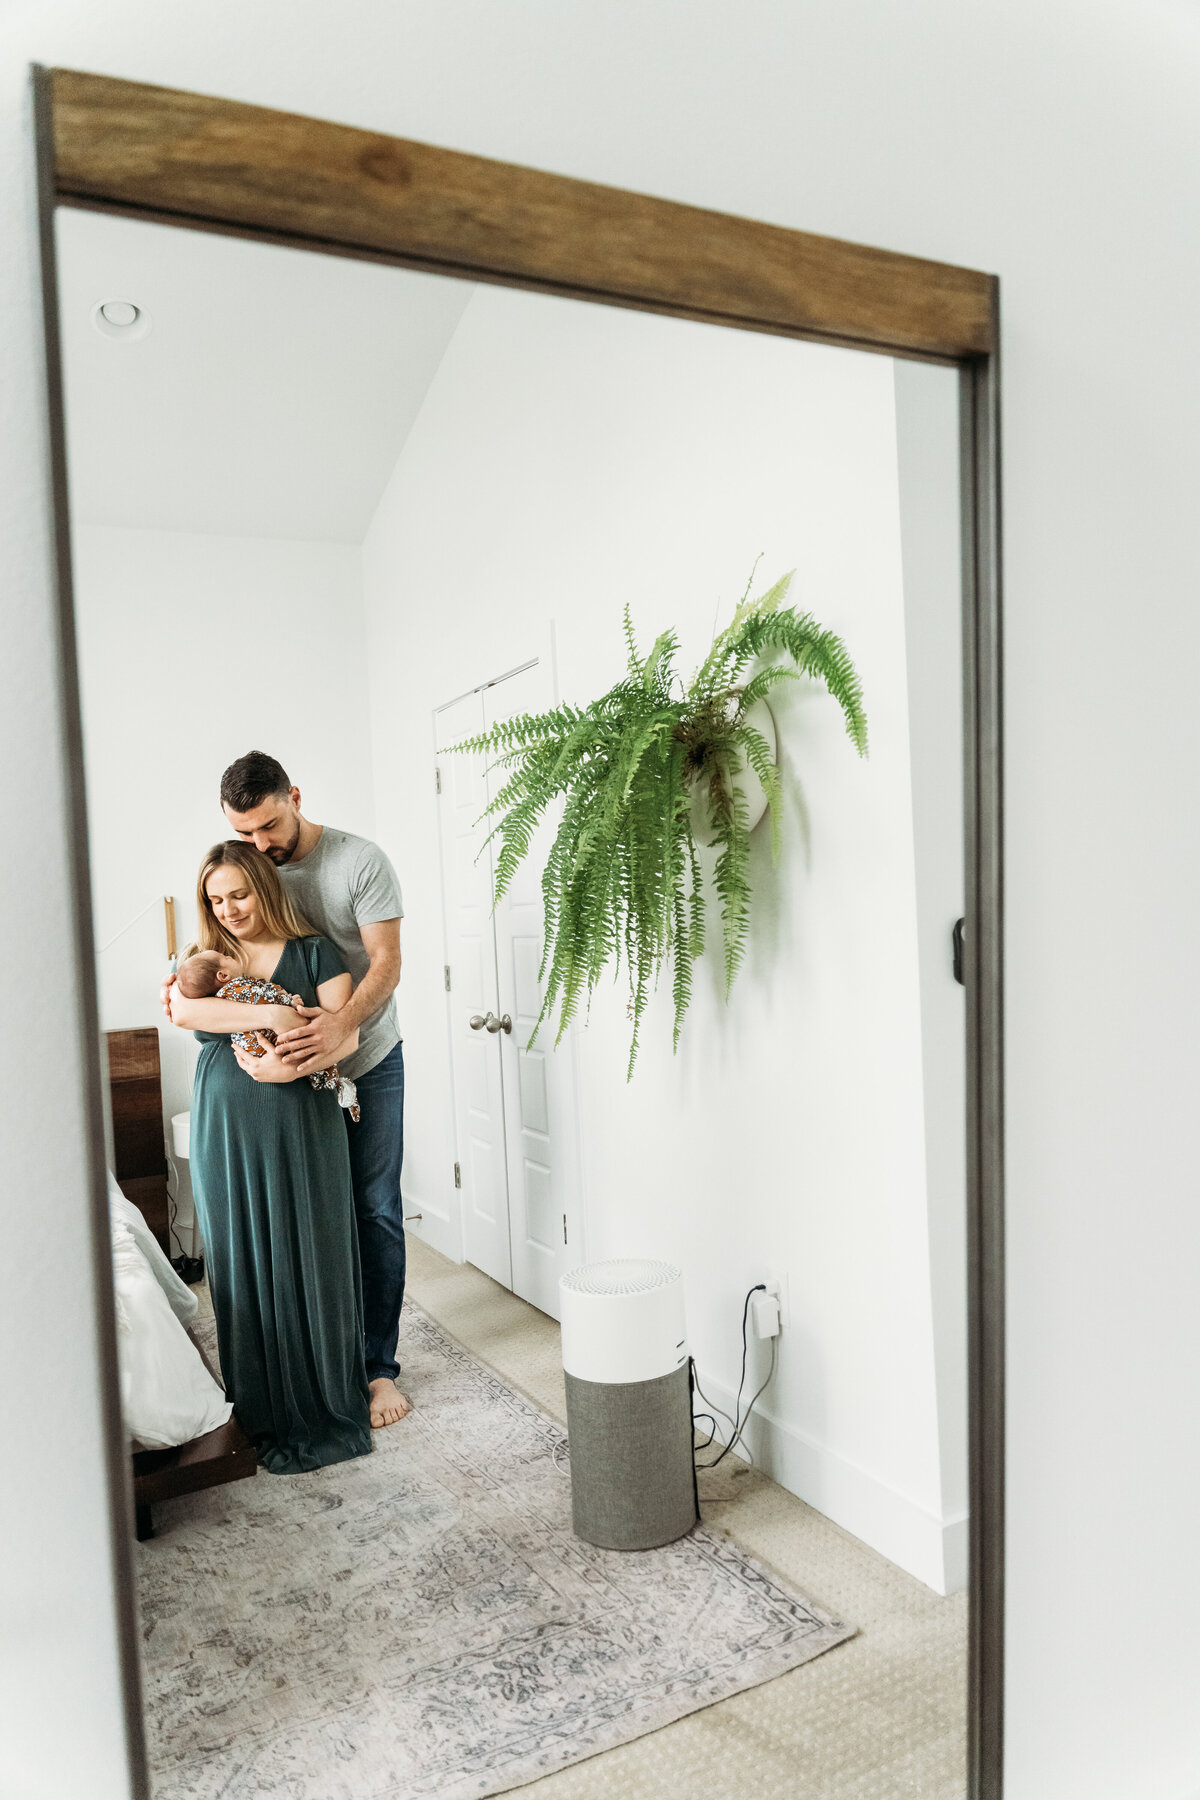 Newborn Photographer. in a large mirror a mother, father and baby being held are reflected